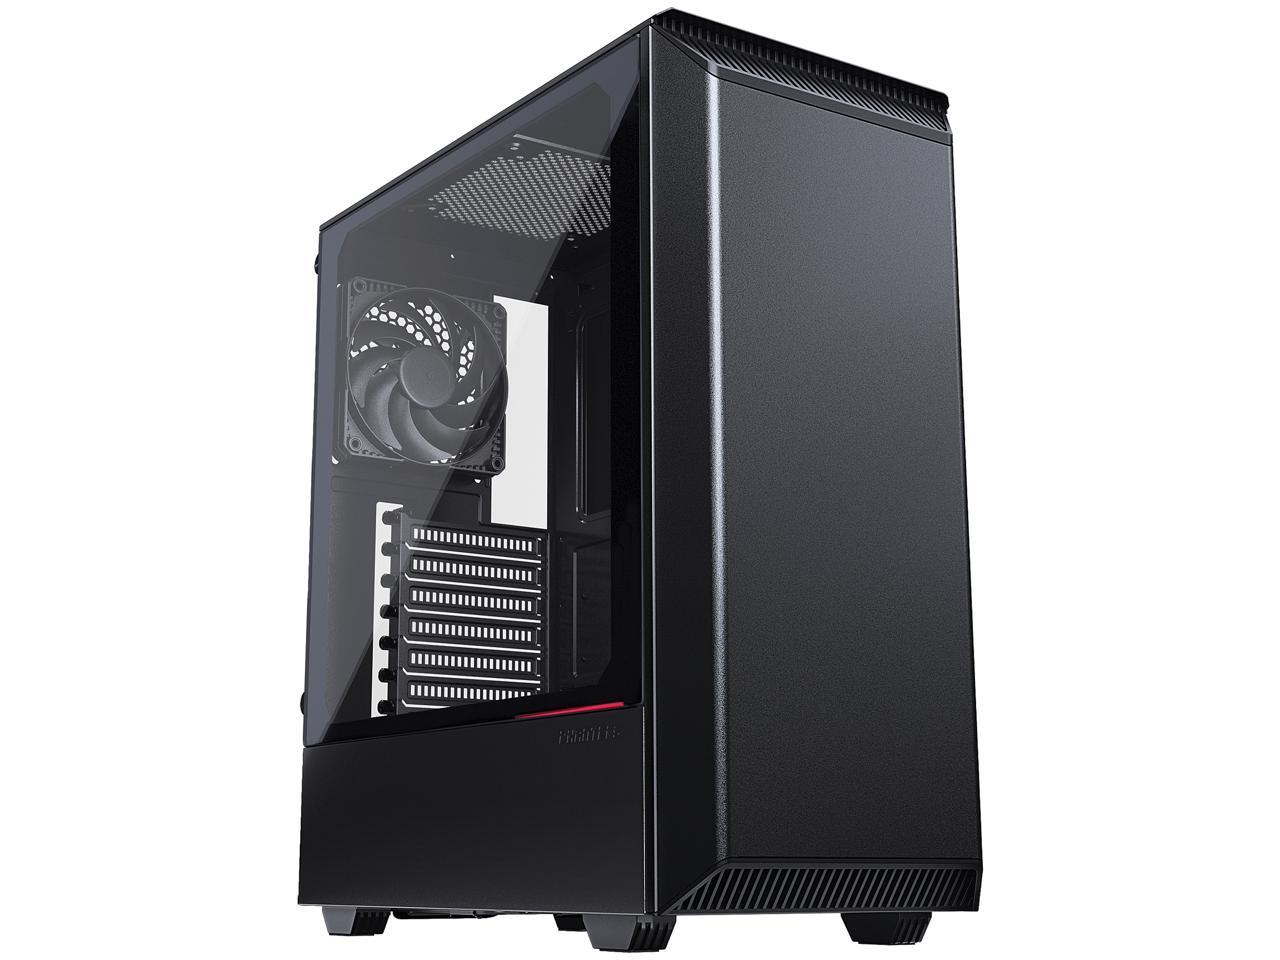 Phanteks Eclipse P300 PH-EC300PTG_BK Black Steel Chassis, Tempered Glass Window ATX Mid Tower Computer Case $30